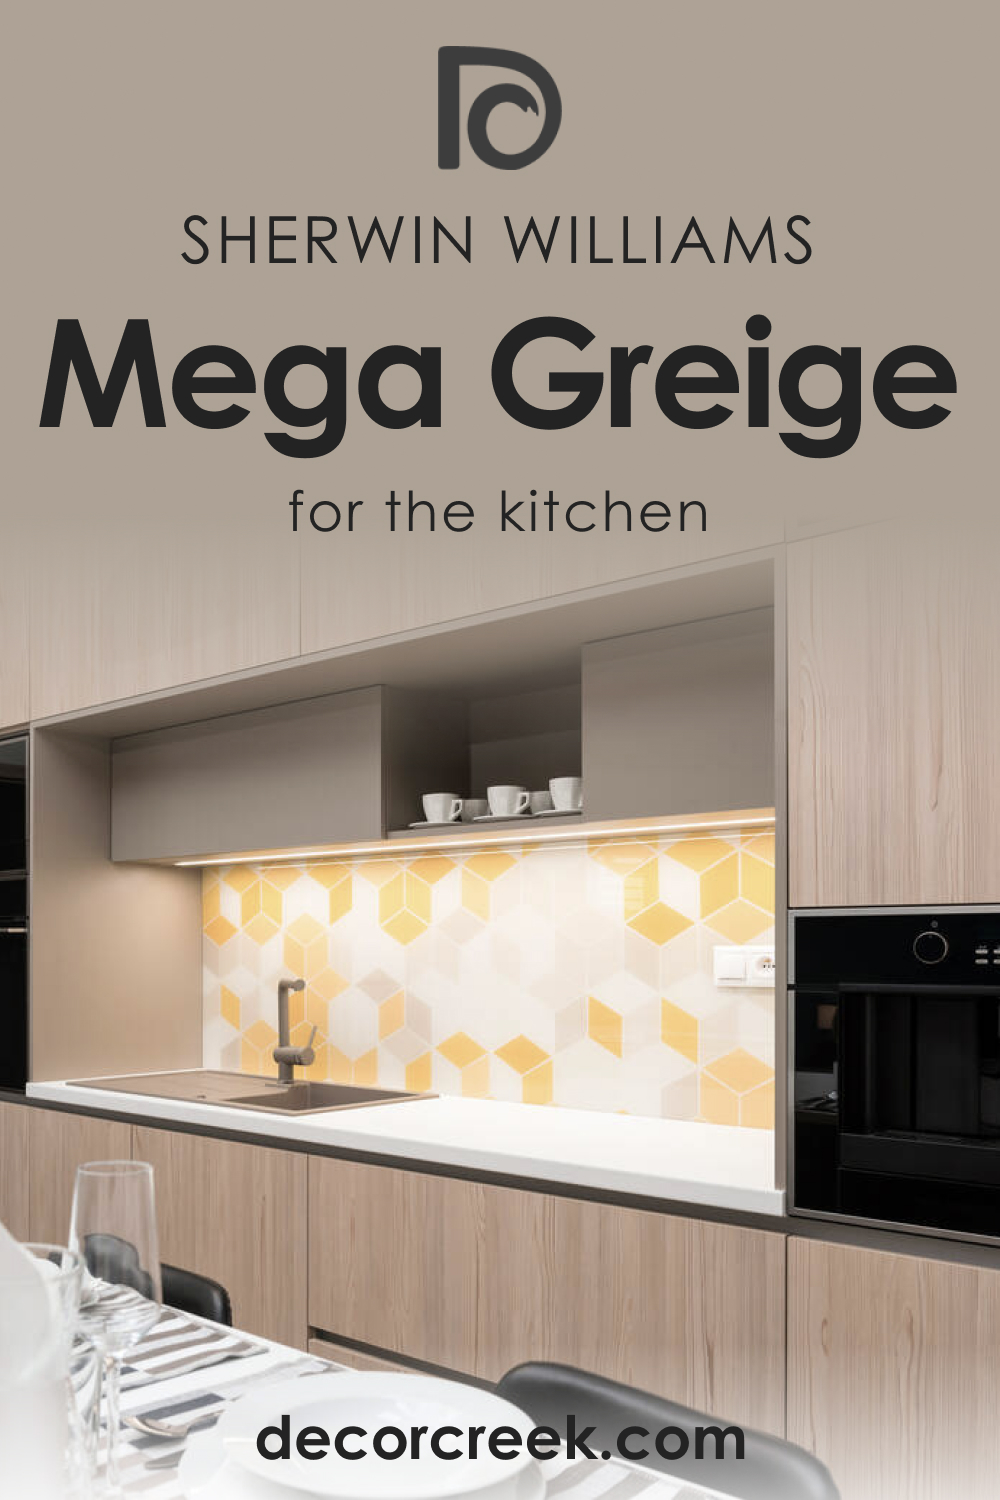 How to Use SW 7031 Mega Greige for the Kitchen?